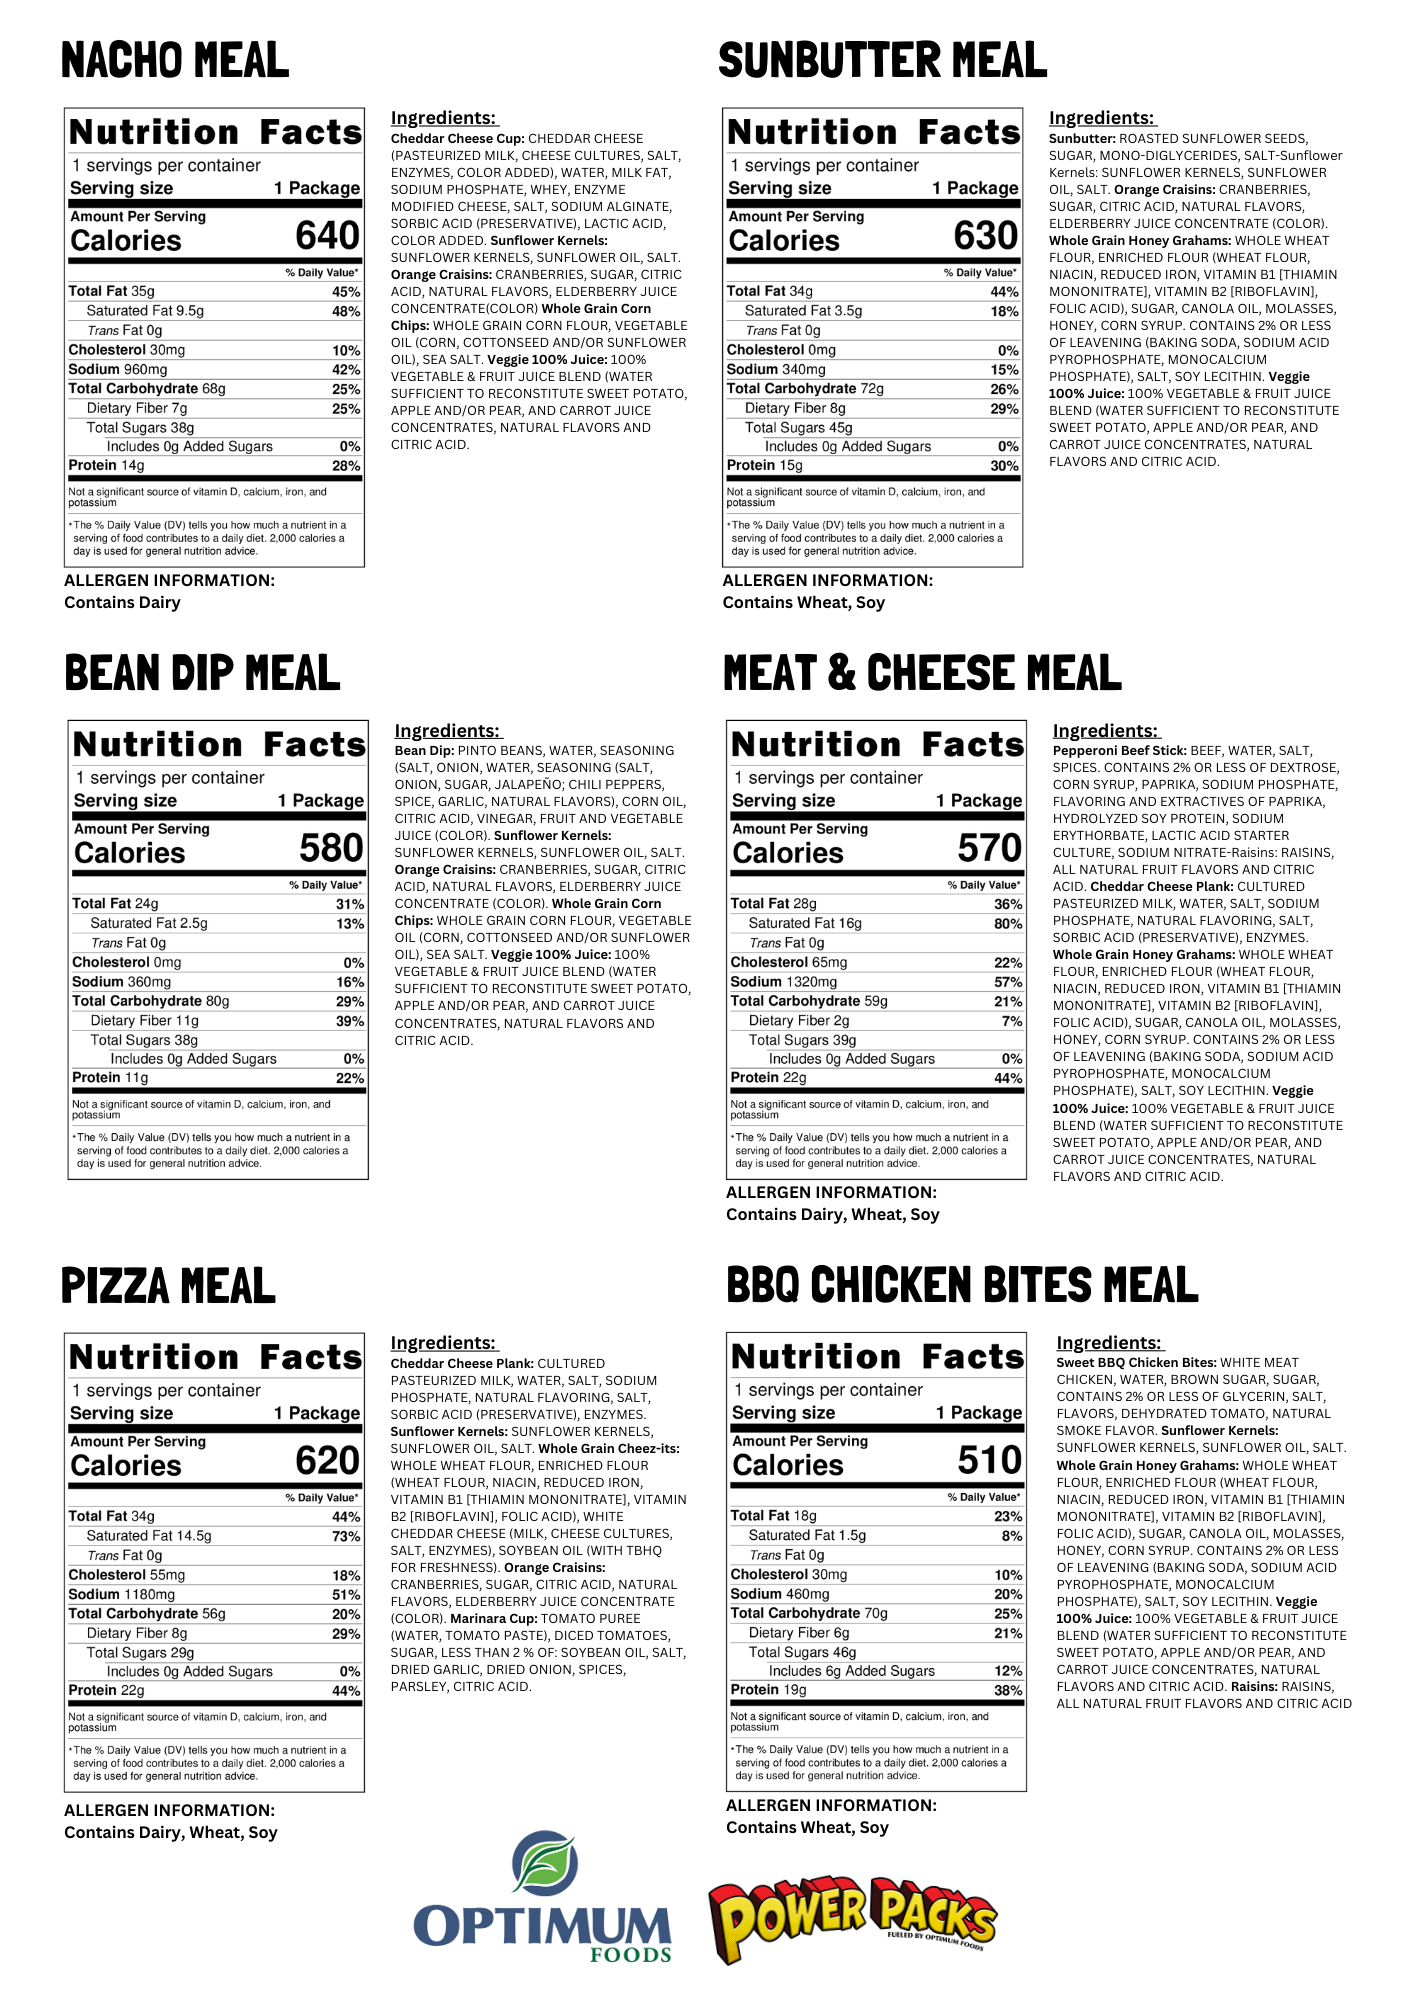 STANDARD Optimum Foods Power Packs Variety Meal Kit (24 Count) - CACFP Lunch/Supper